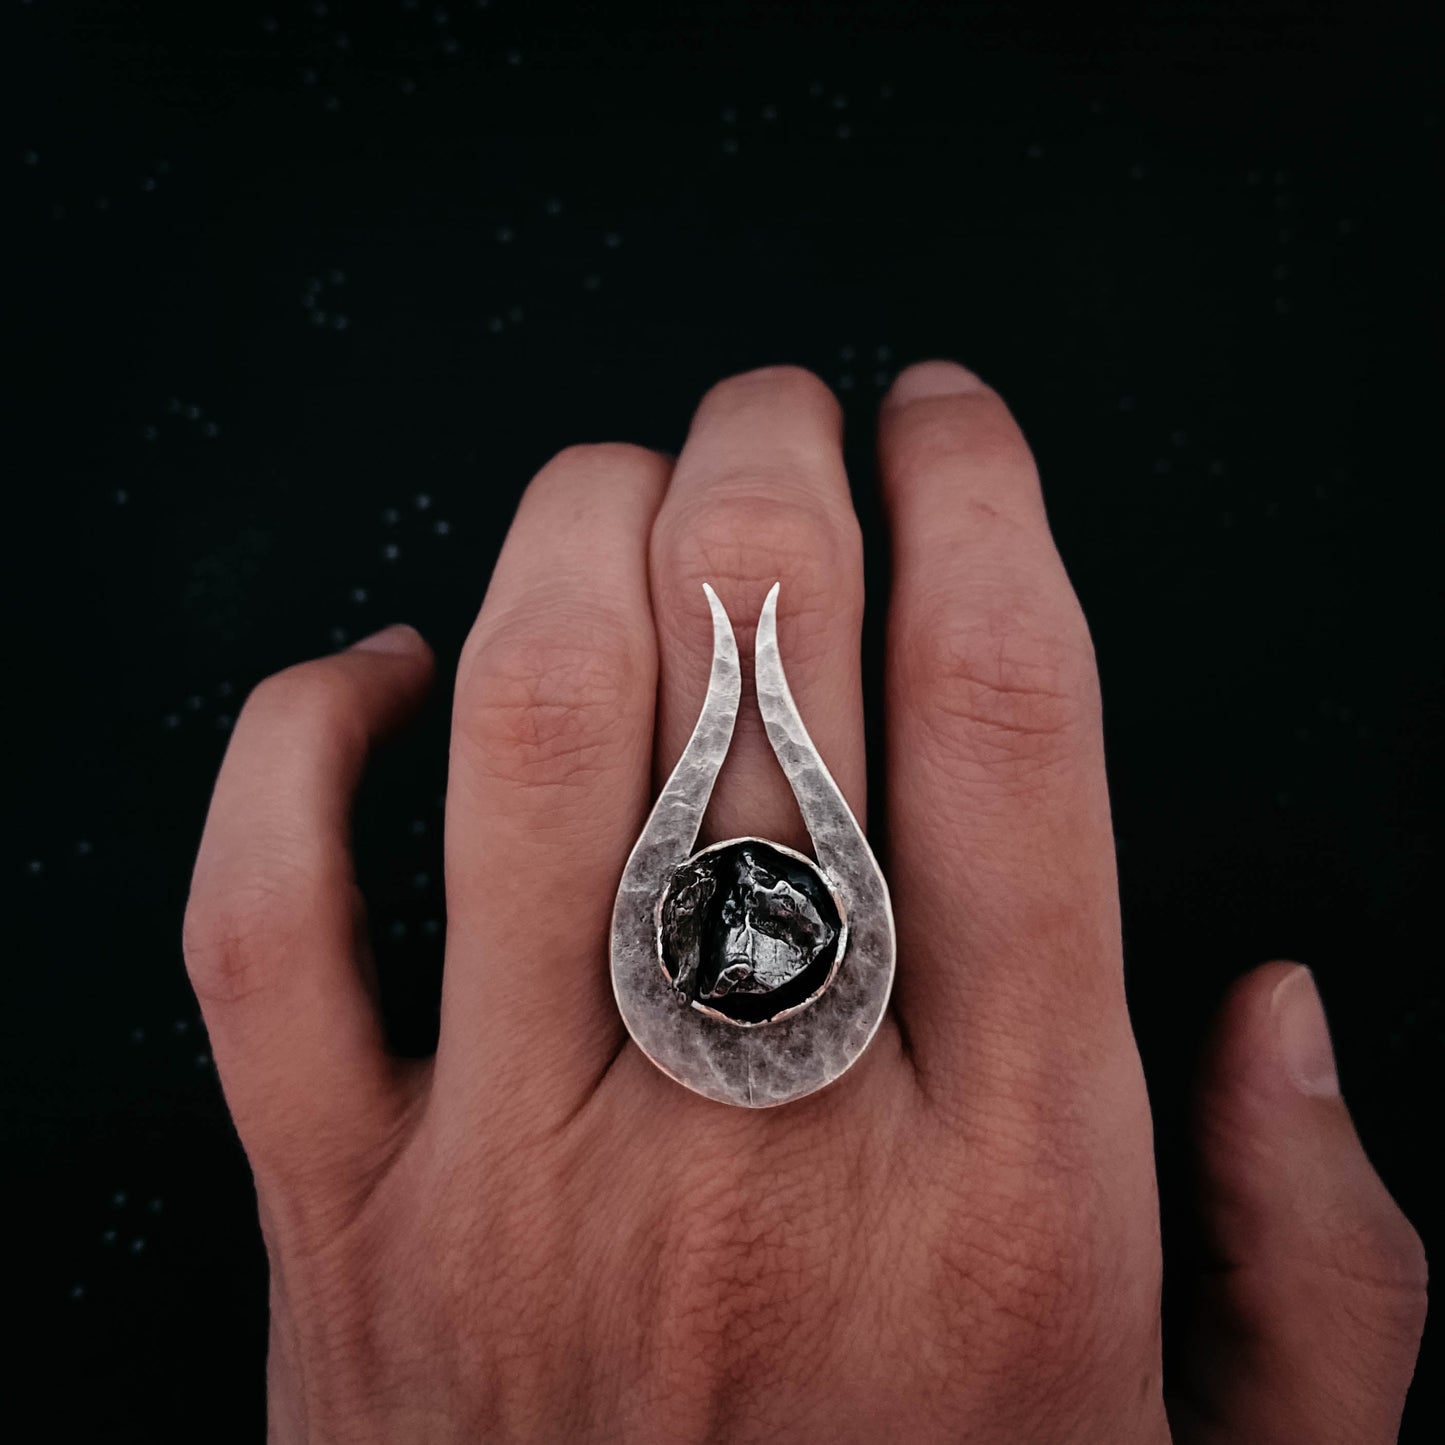 Comet Ring with Authentic Meteorite